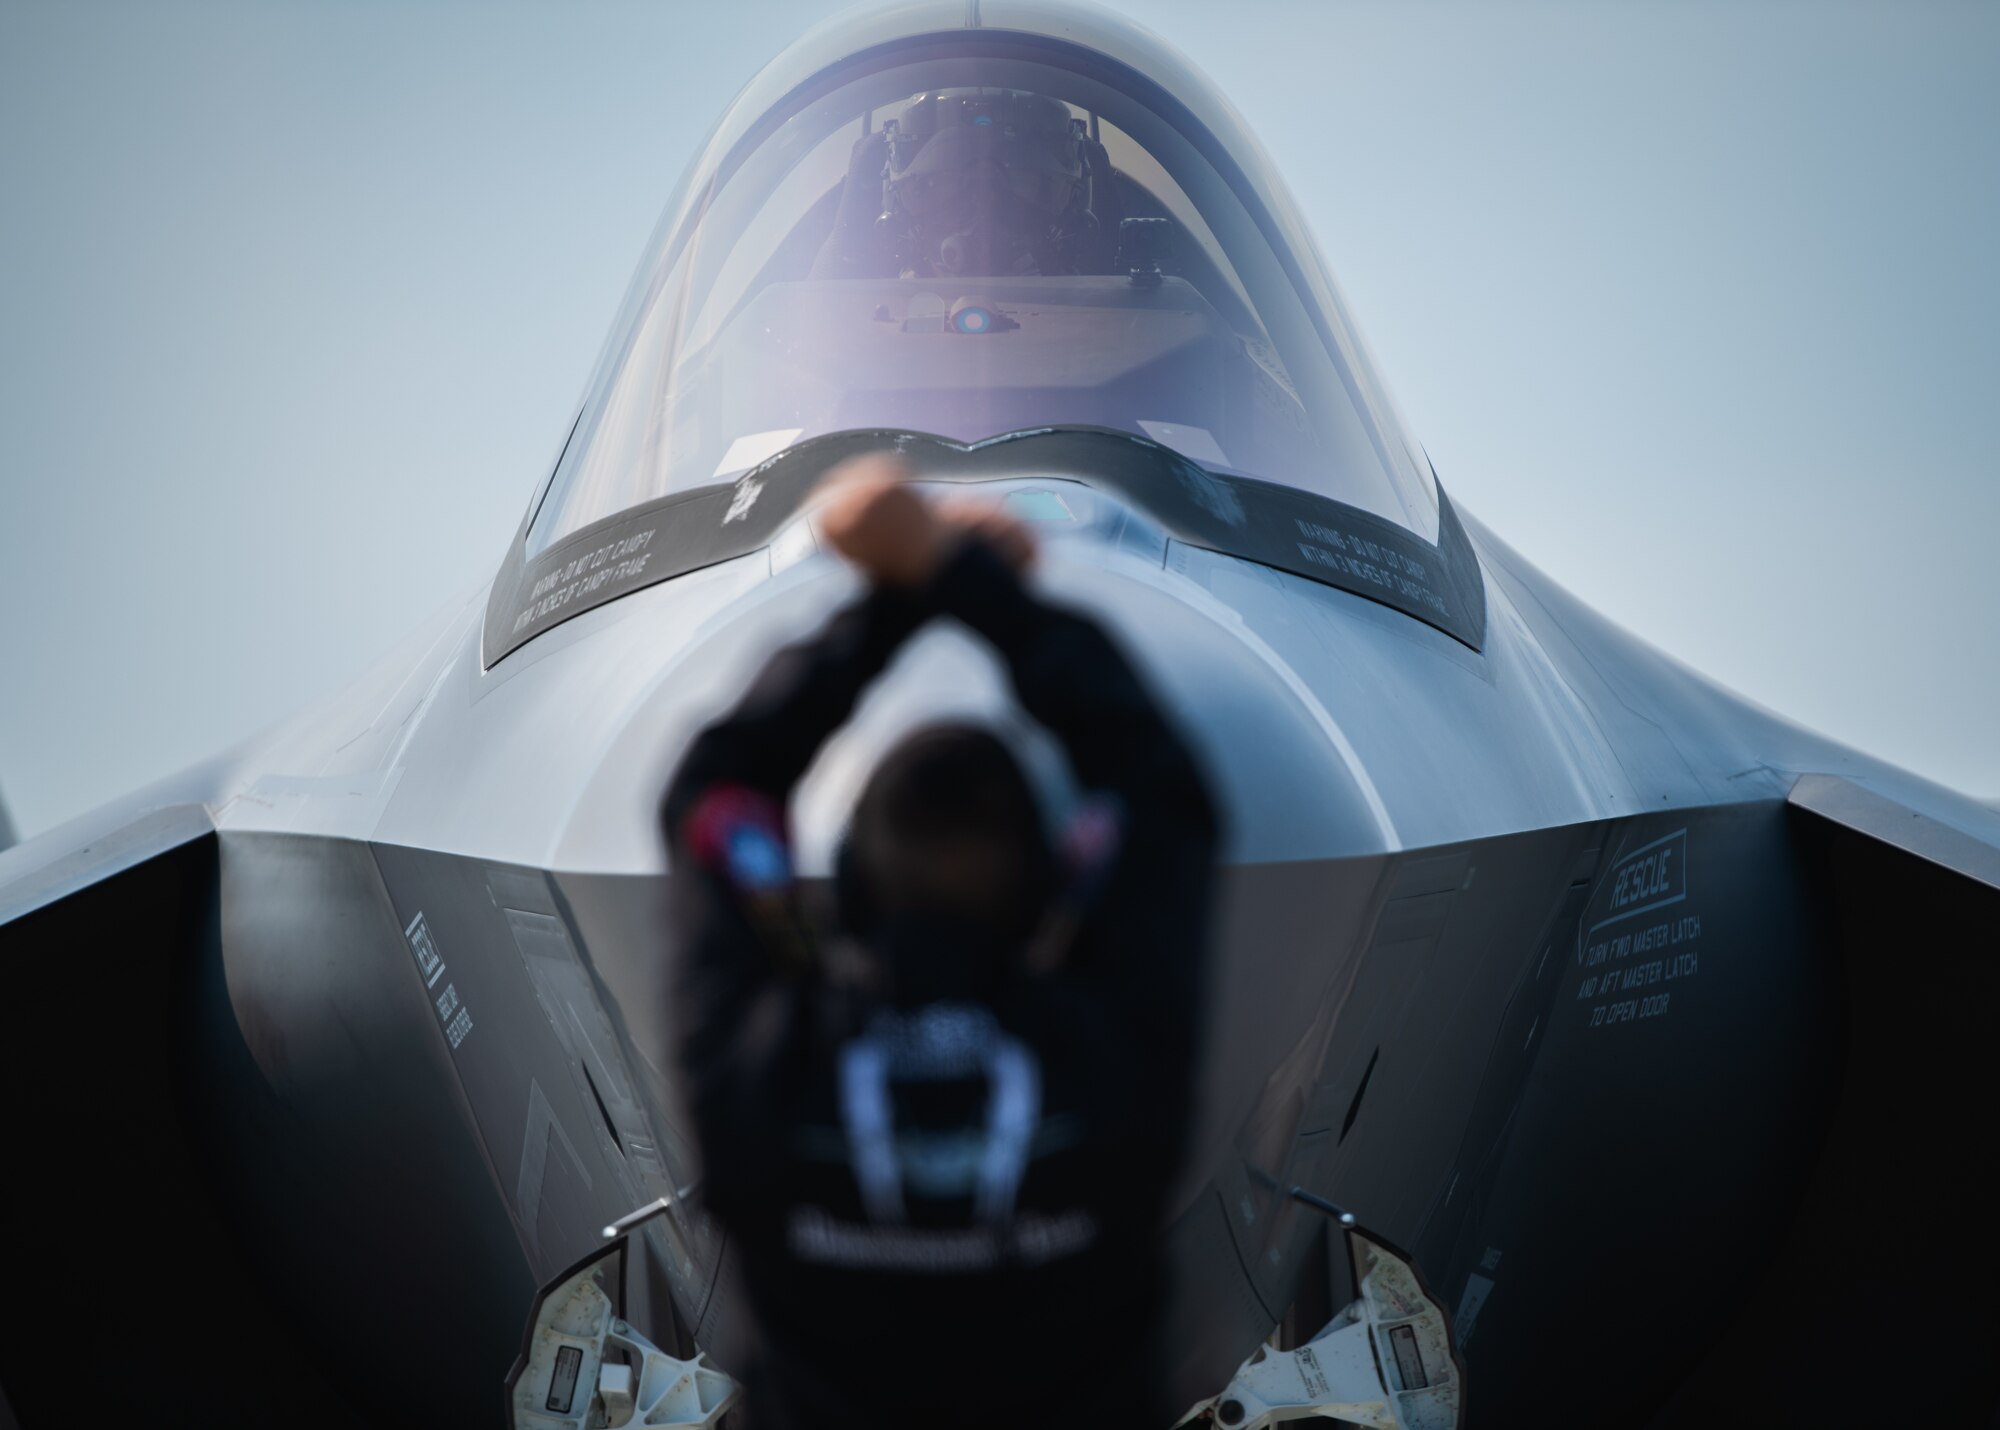 Capt. Andrew “Dojo” Olson, F-35 Demonstration Team pilot and commander prepares to taxi out to the runway during the Arctic Lightning Airshow July 13, 2019, at Eielson Air Force Base, Alaska. The aerial demonstration consists of 16 maneuvers that fully showcase the capabilities of the F-35A Lightning II. (U.S. Air Force photo by Senior Airman Alexander Cook)